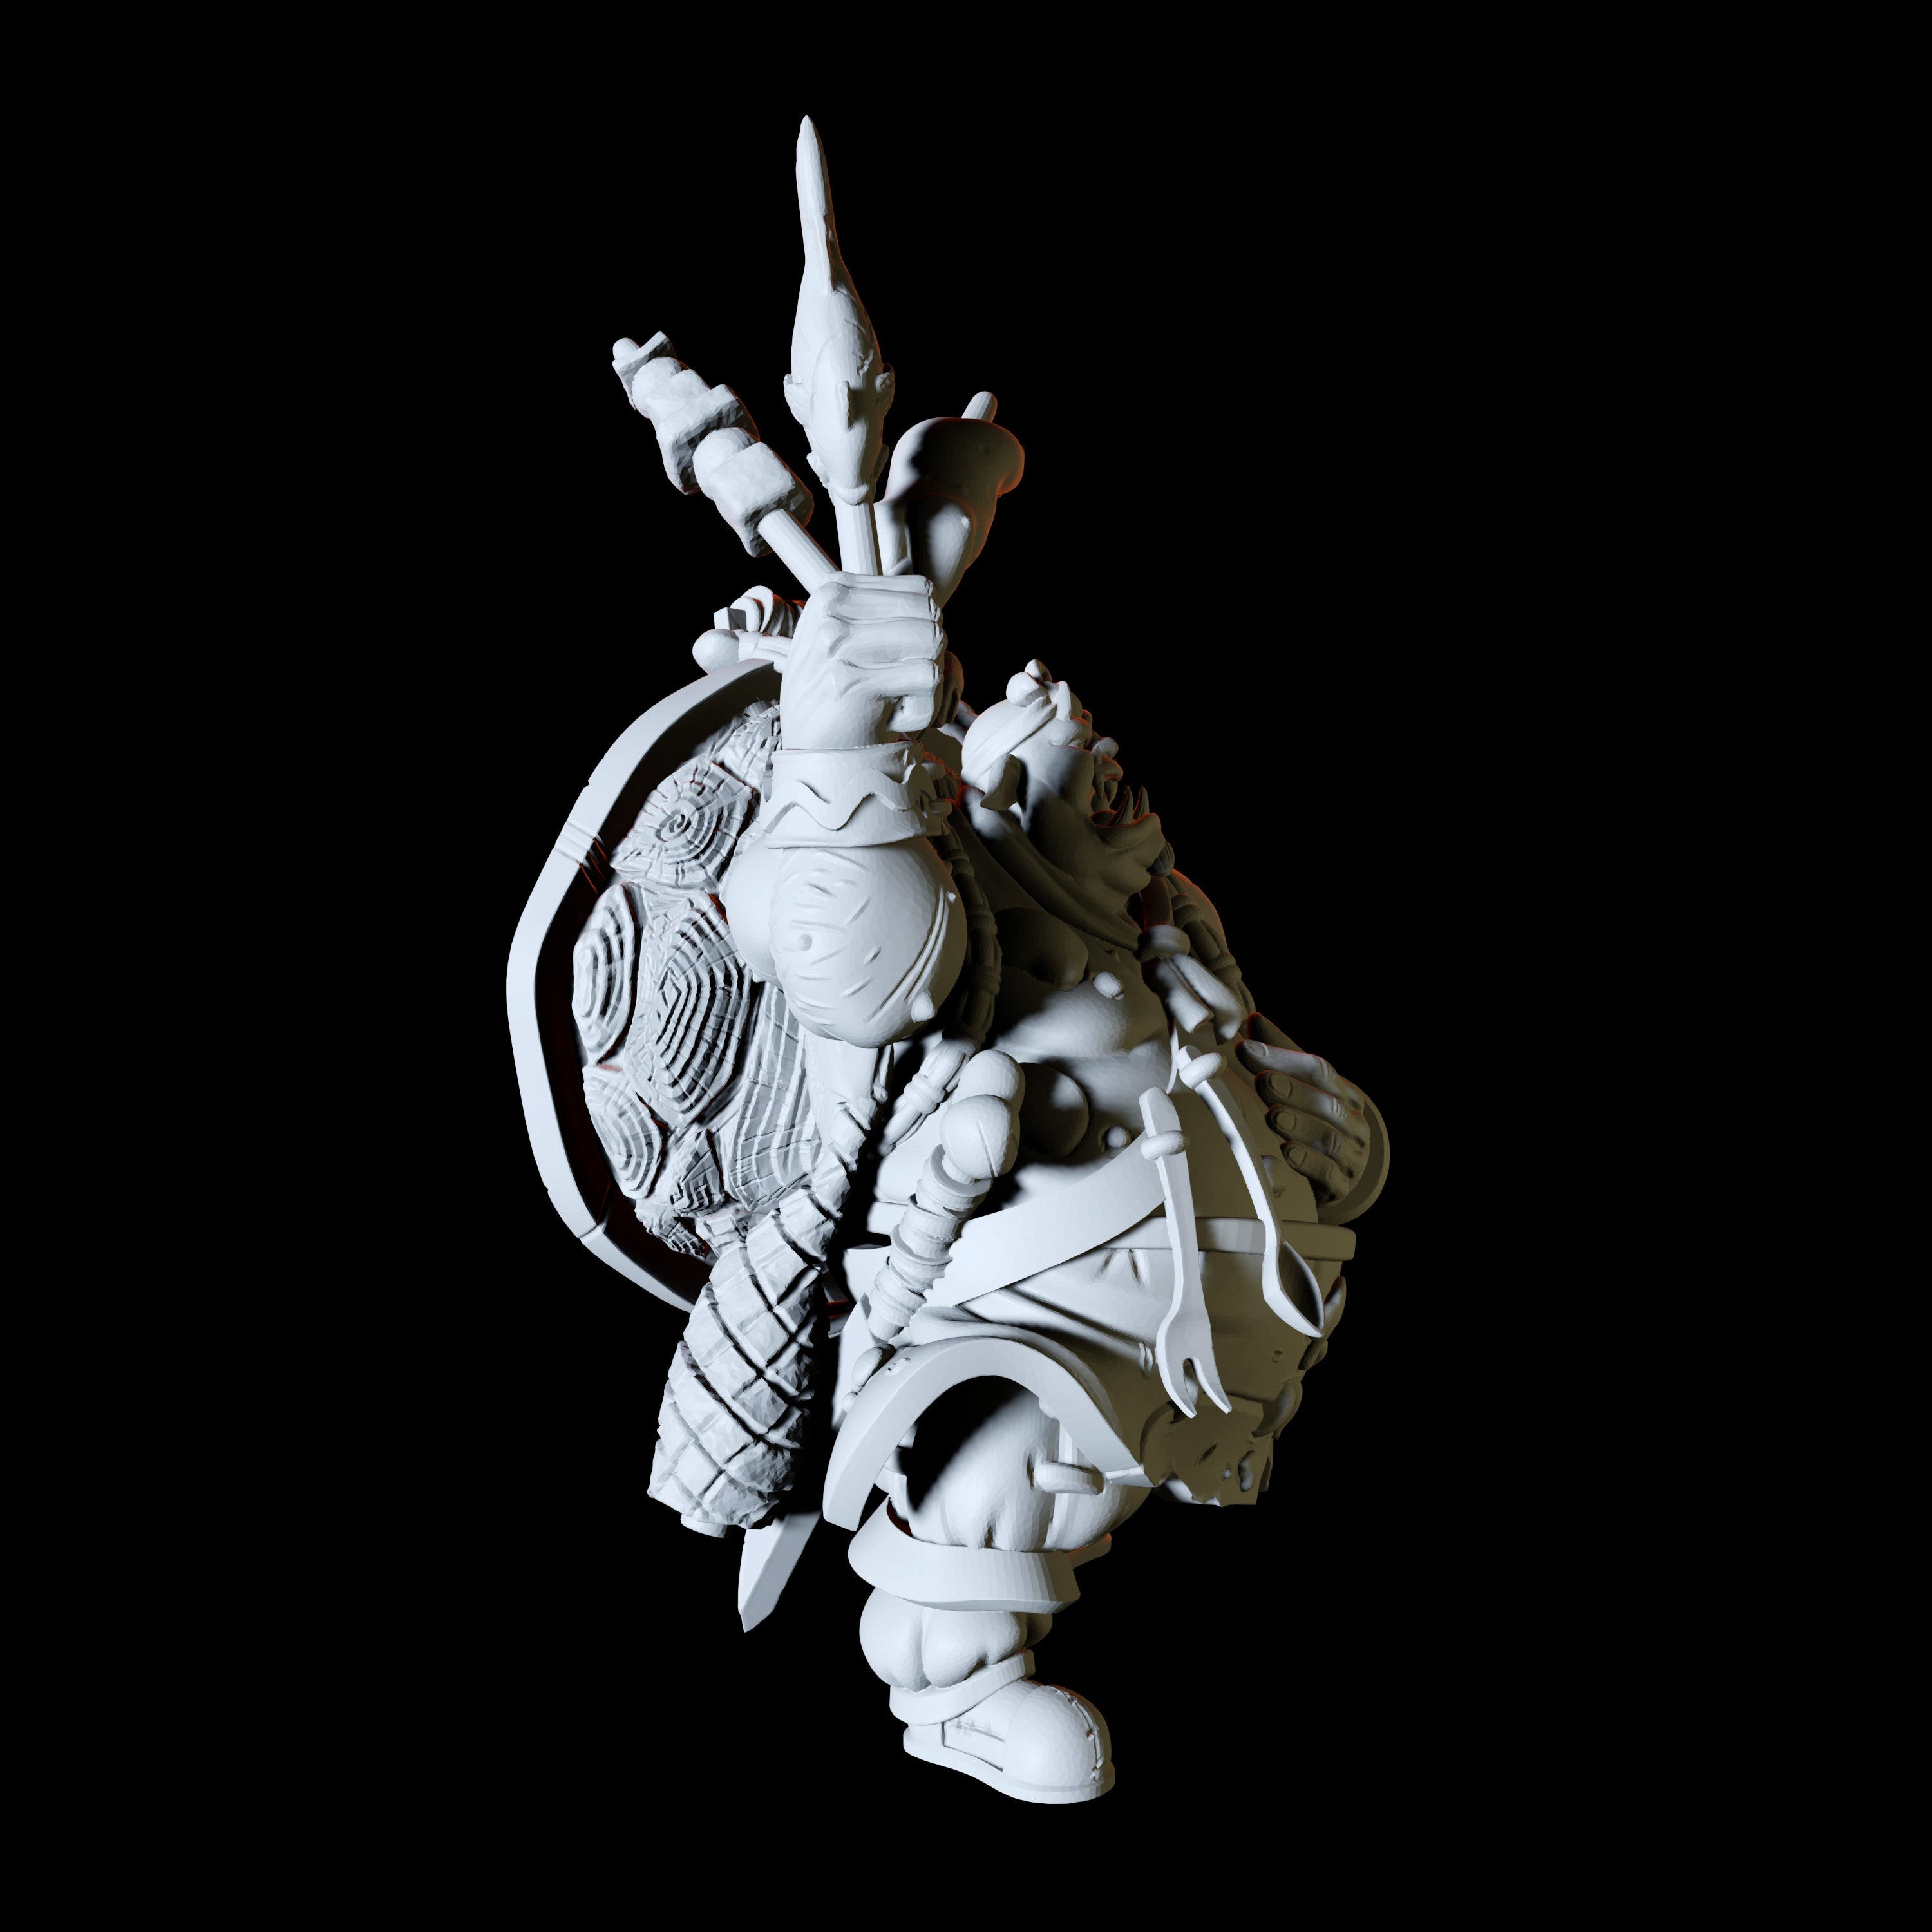 Half Orc Miniature for Dungeons and Dragons - Myth Forged